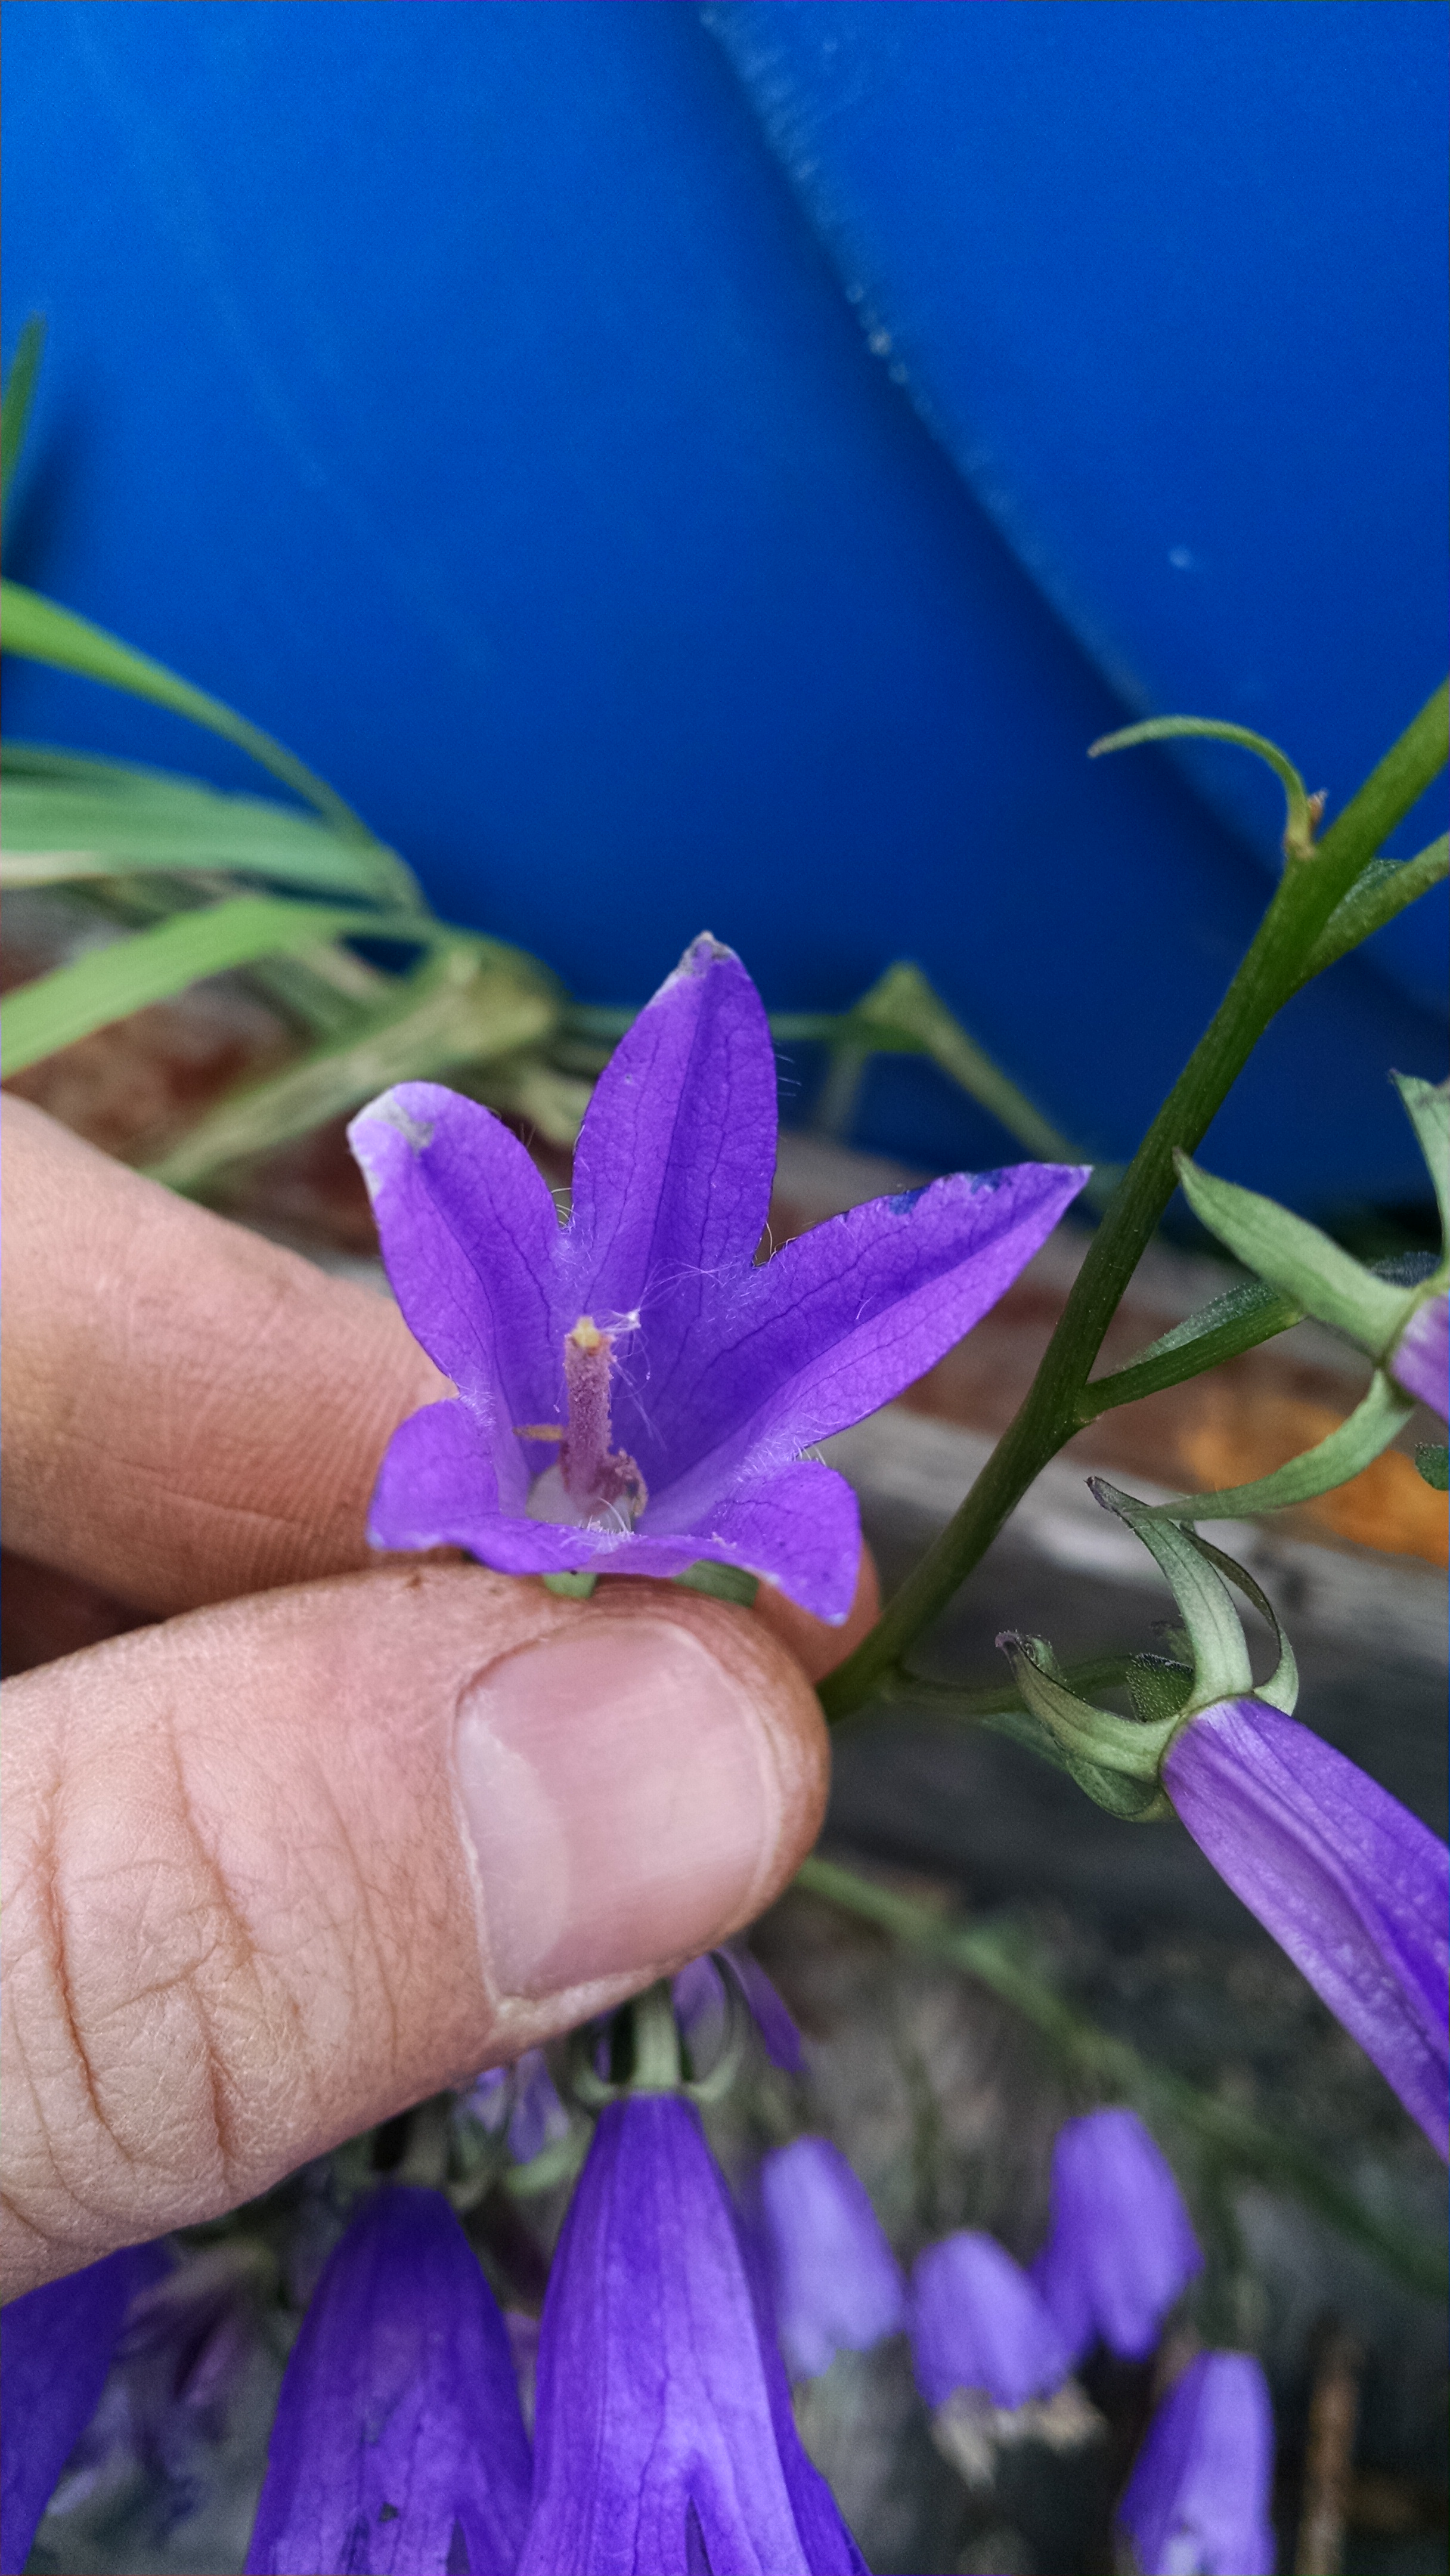 identify purple flower blooming in fall - Ask an Expert